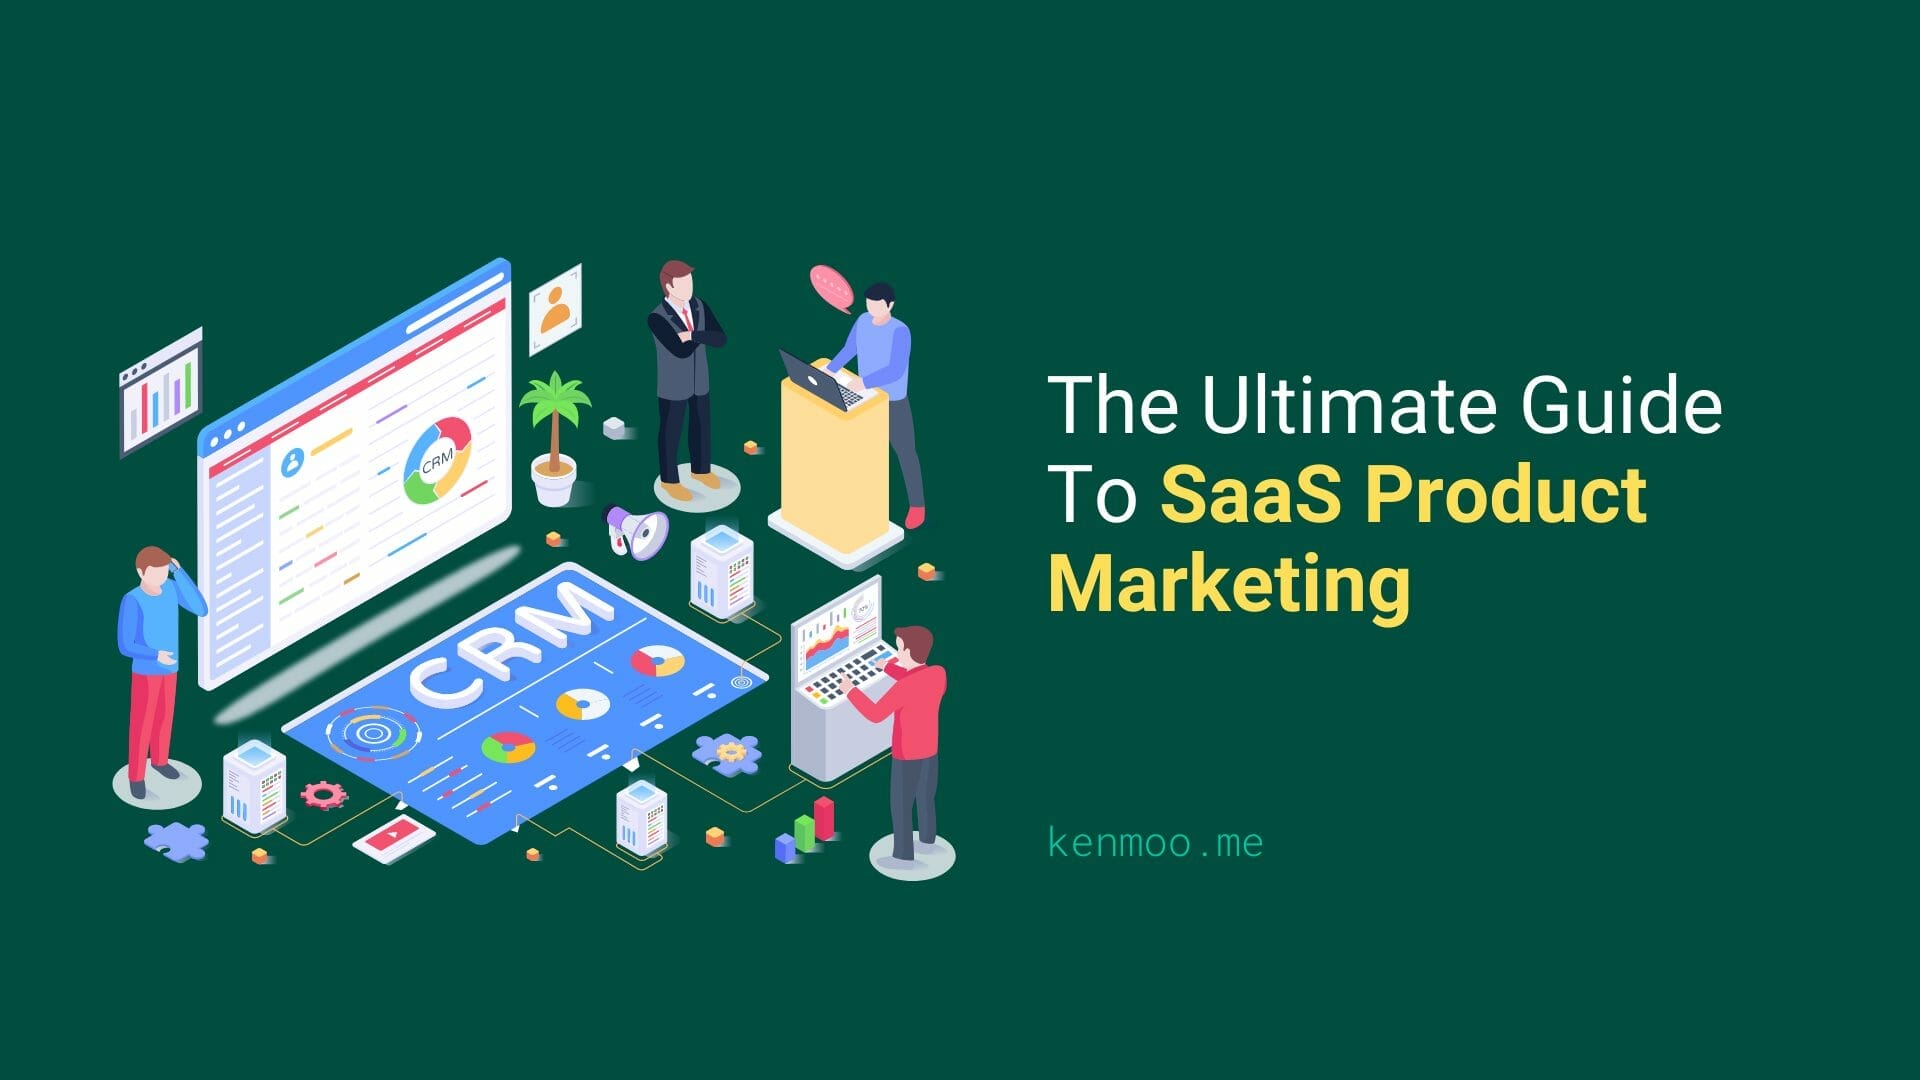 The Ultimate Guide To SaaS Product Marketing